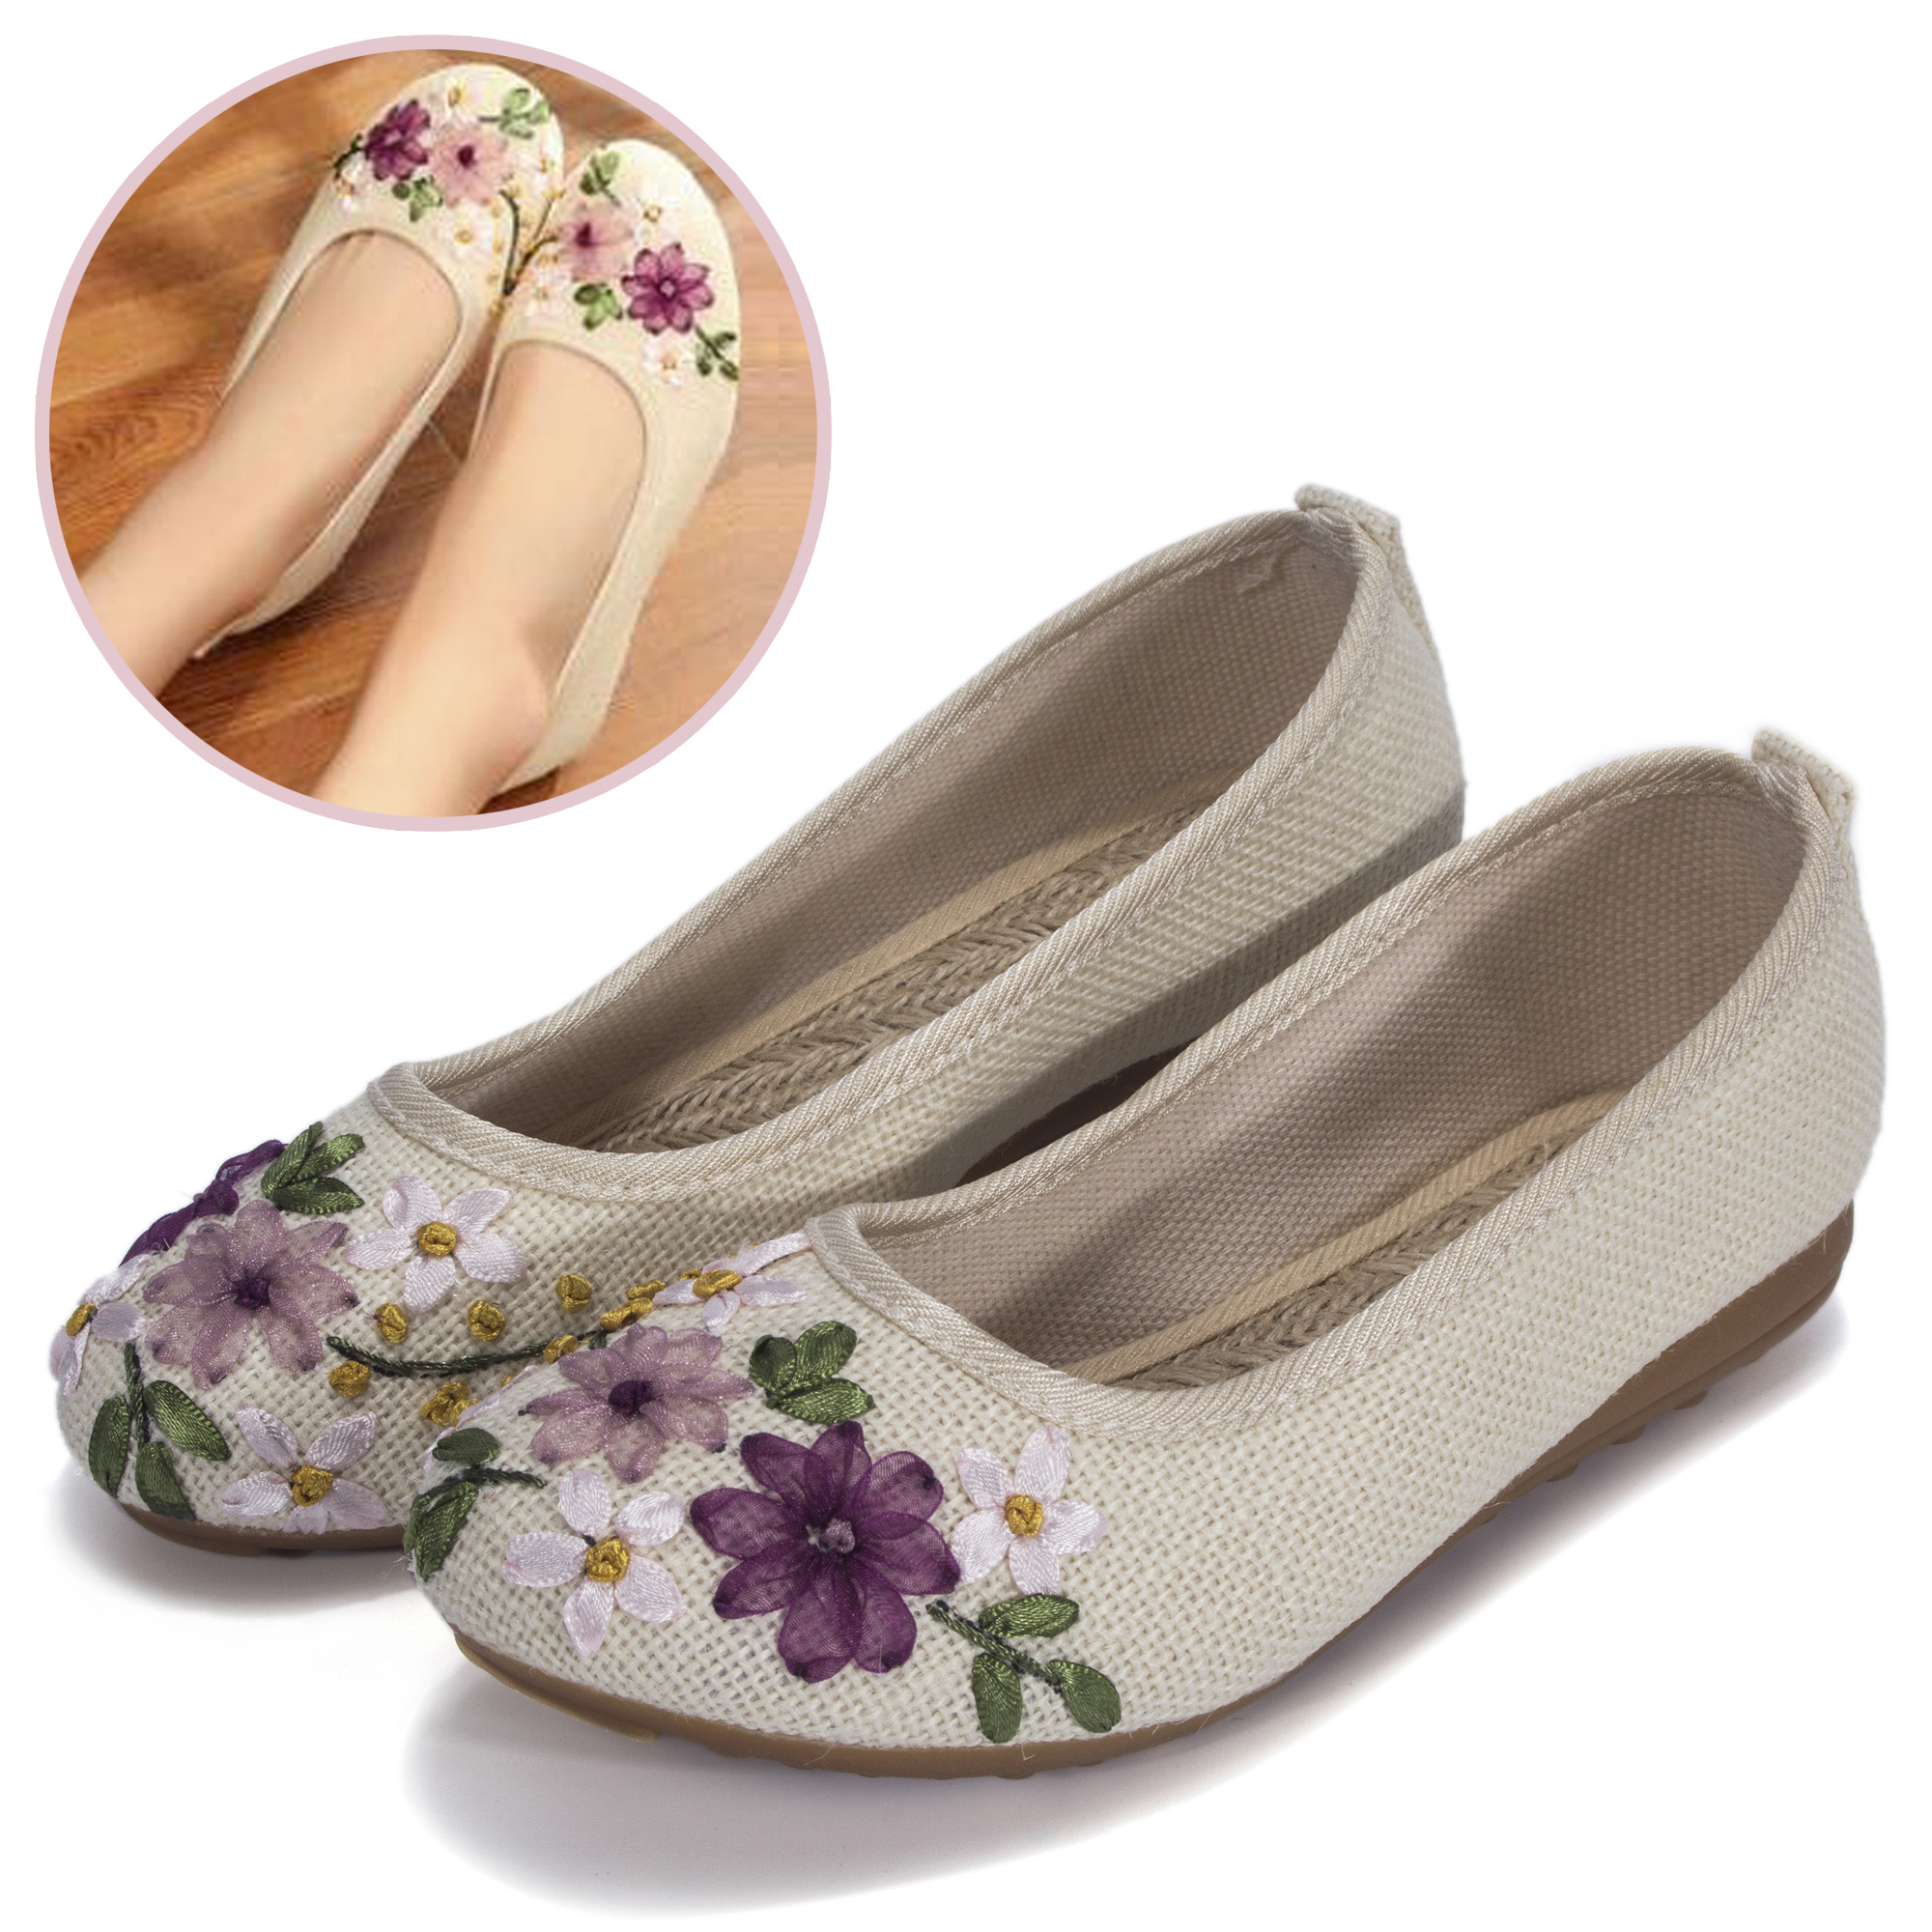 DODOING Womens Ballet Flats Floral Embroidered Cut Platform Shoe Slip On Flats Casual Driving Loafers Shoes, Khaki/ White/ Navy Blue, 4-10 Size - image 1 of 7